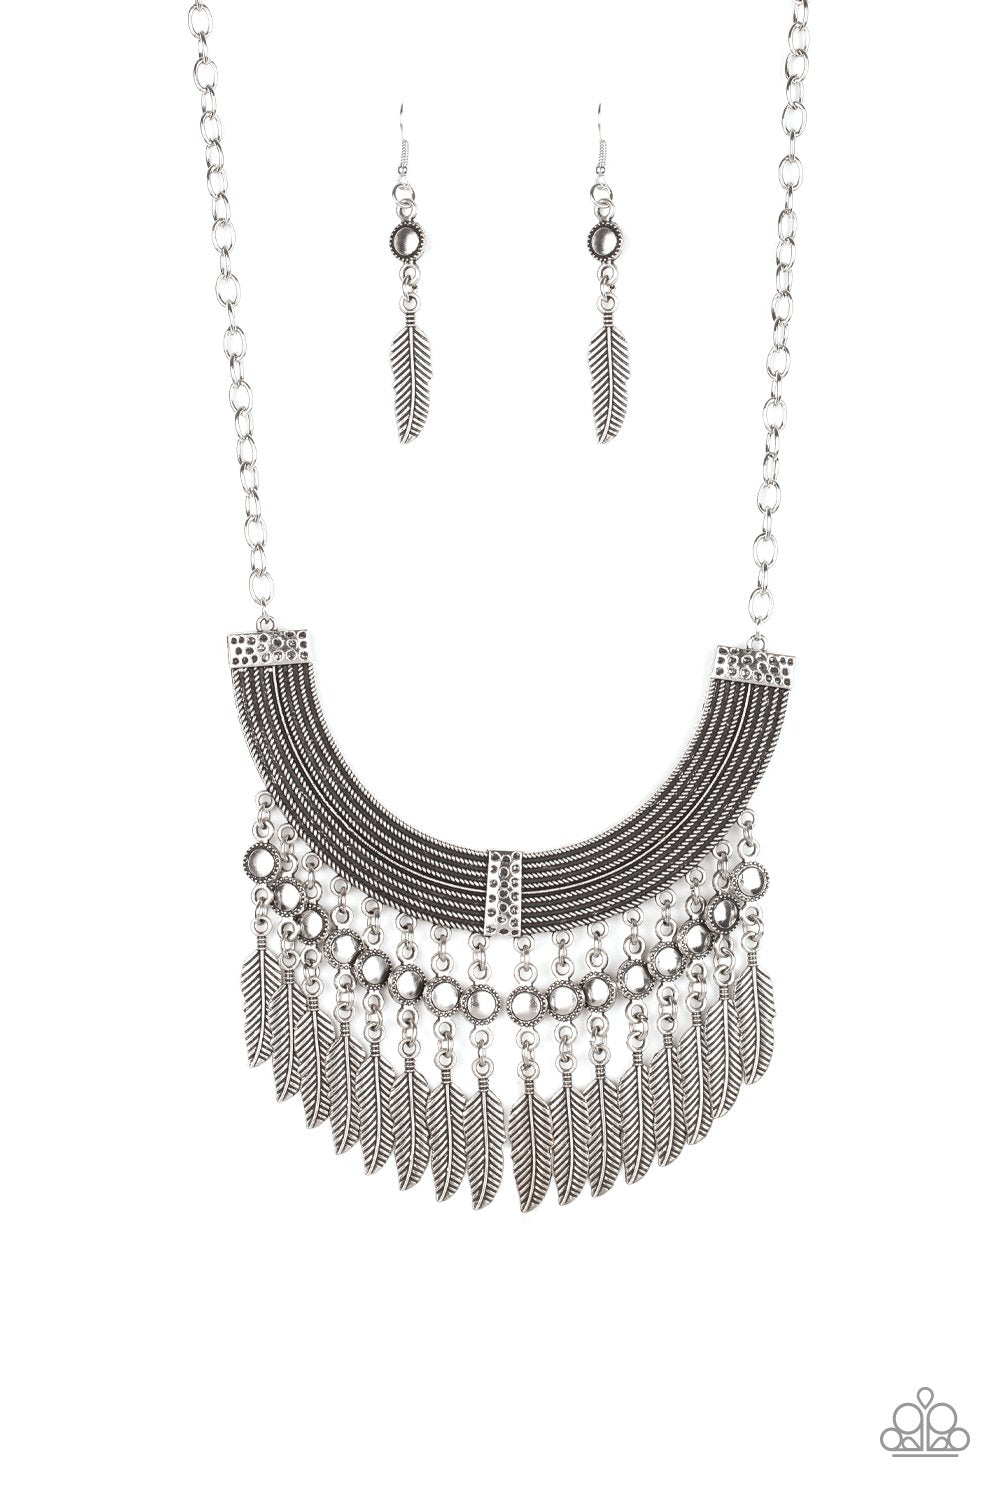 Paparazzi Accessories Fierce in Feathers - Silver Necklaces - Lady T Accessories